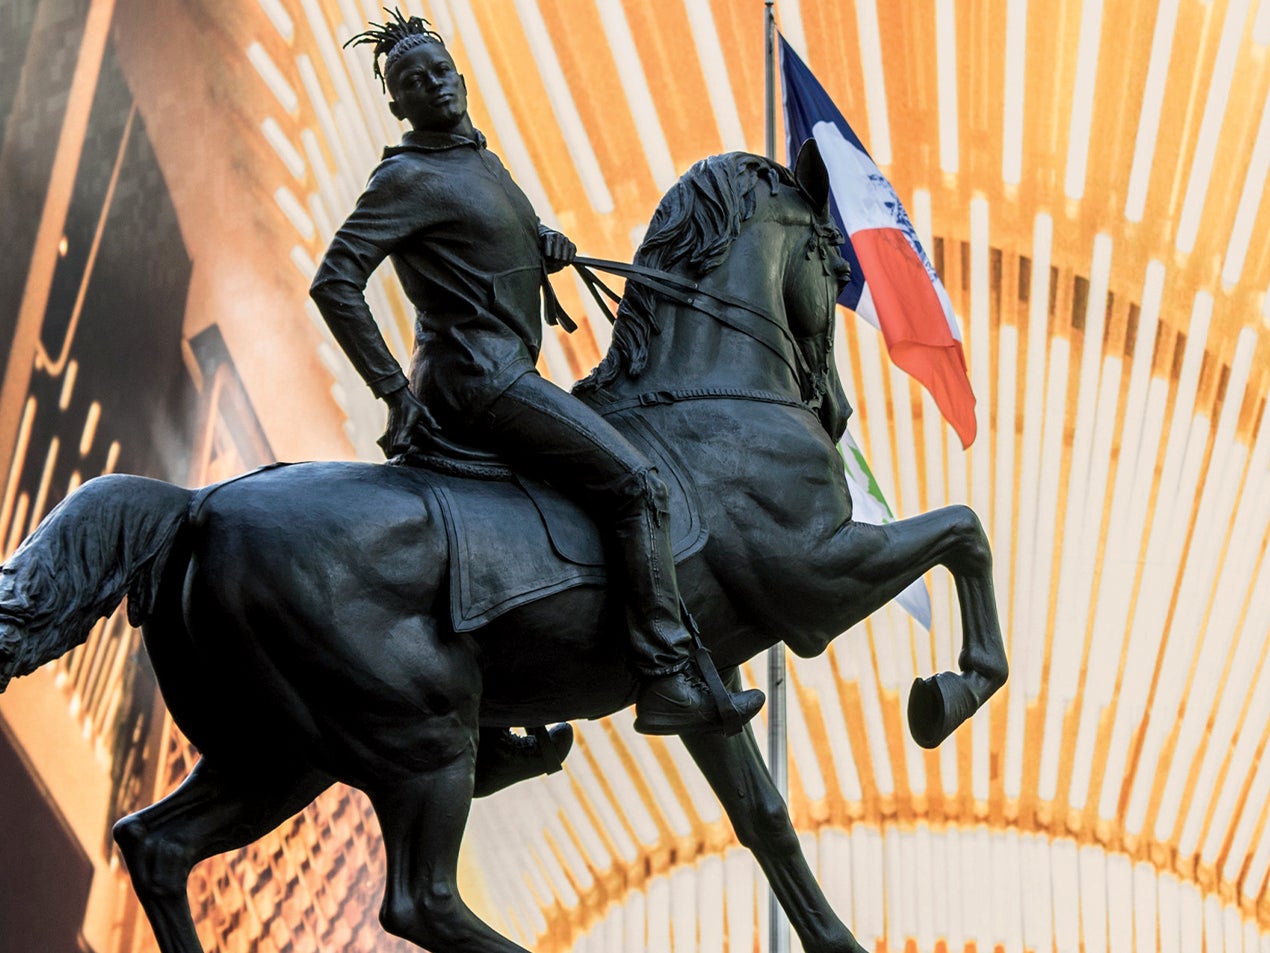 Regal Black Statue Unveiled In Former Capital Of The Confederacy + 9 Other Headlines We're Talking About